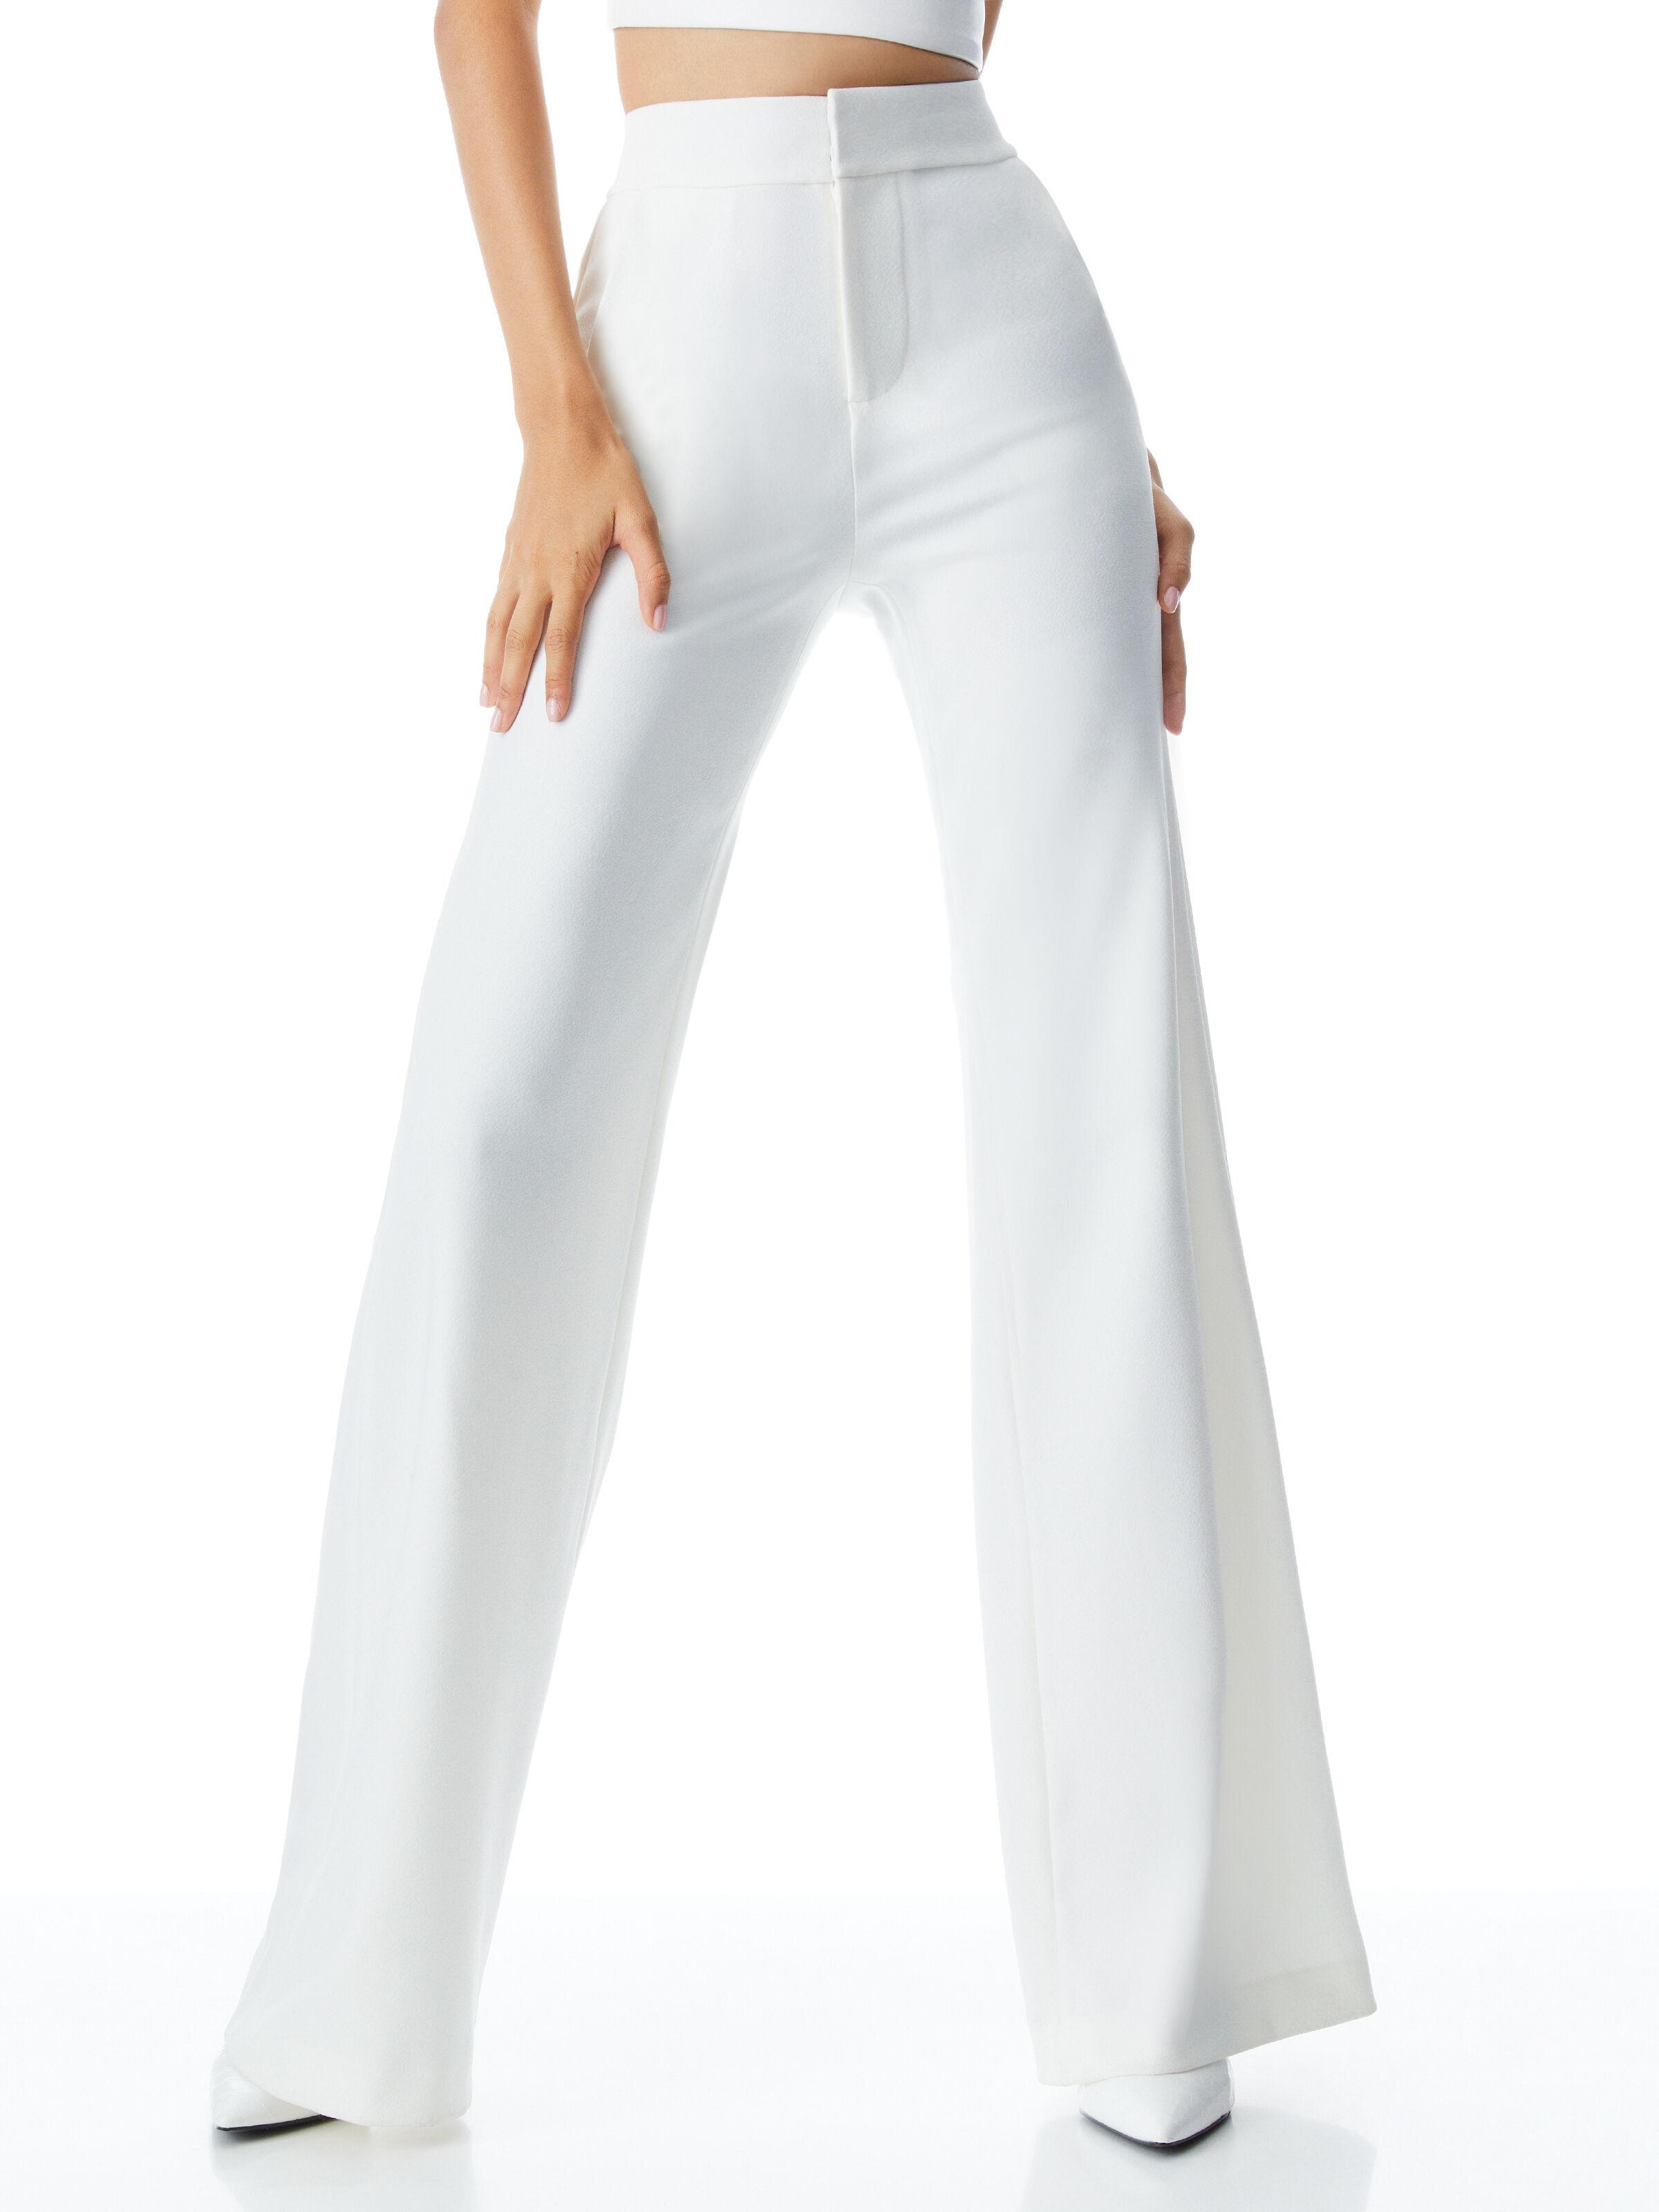 Alice + Olivia Alice + Olivia Deanna High Waisted Bootcut Pant in White |  Lyst